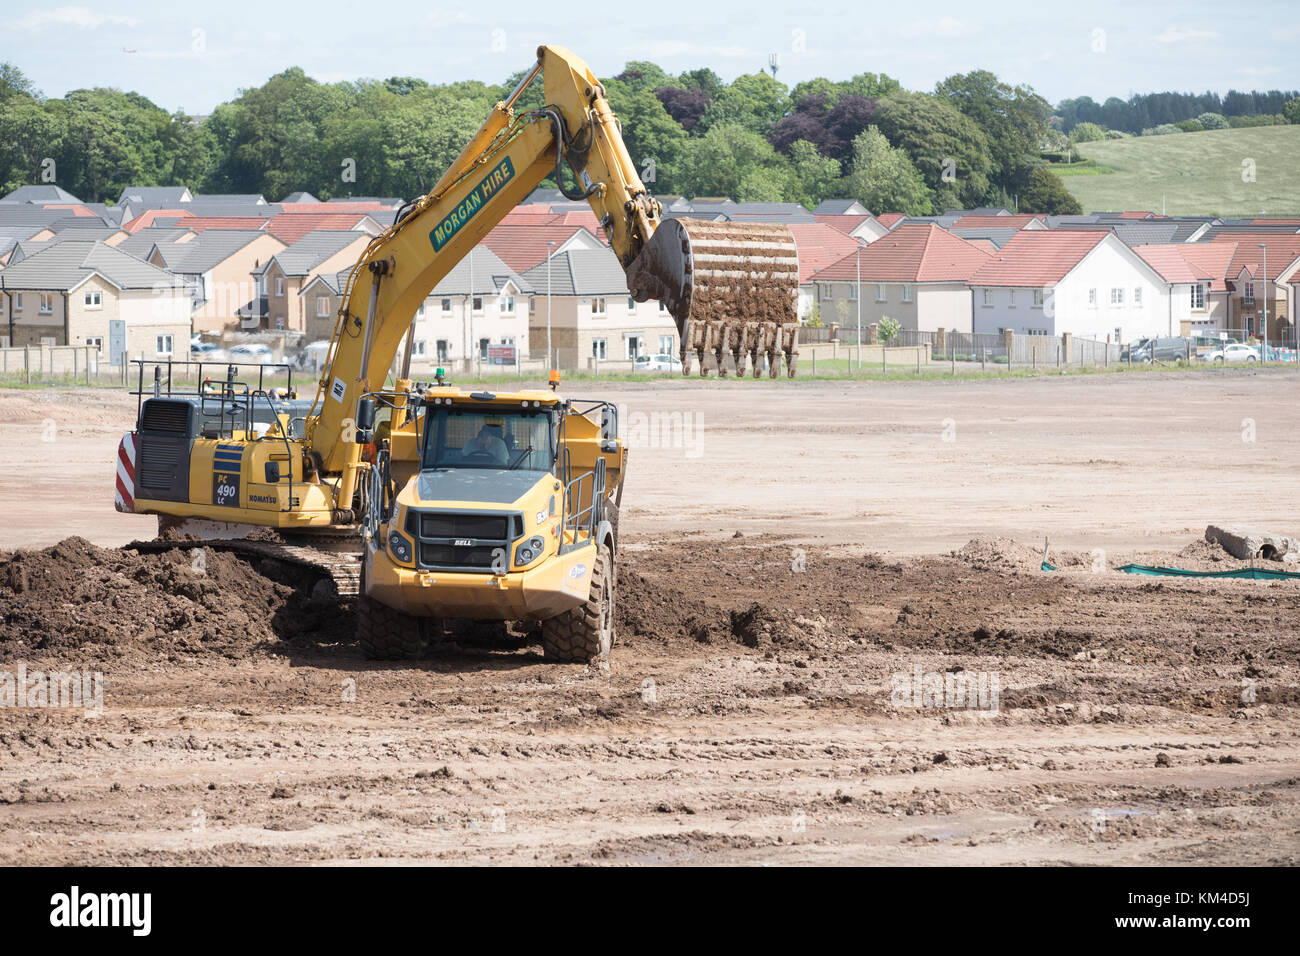 House building on a brownfield site in Bishopton, Scotland showing new houses, cleared land and diggers preparing the ground Stock Photo